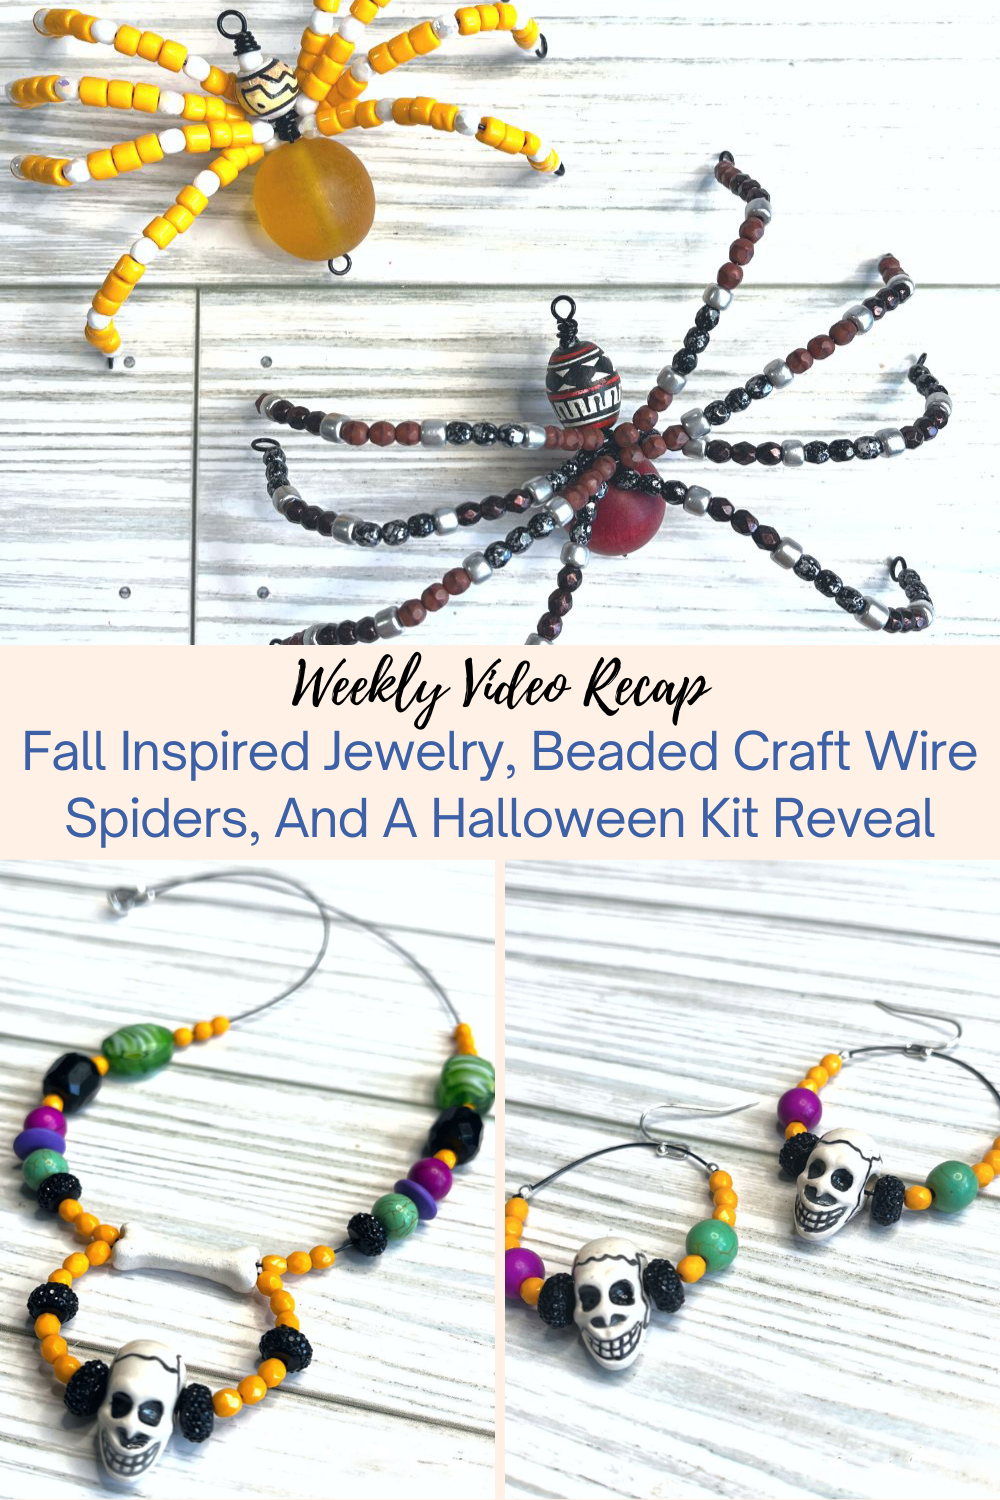 Fall Inspired Jewelry, Beaded Craft Wire Spiders, And A Halloween Kit Reveal Collage